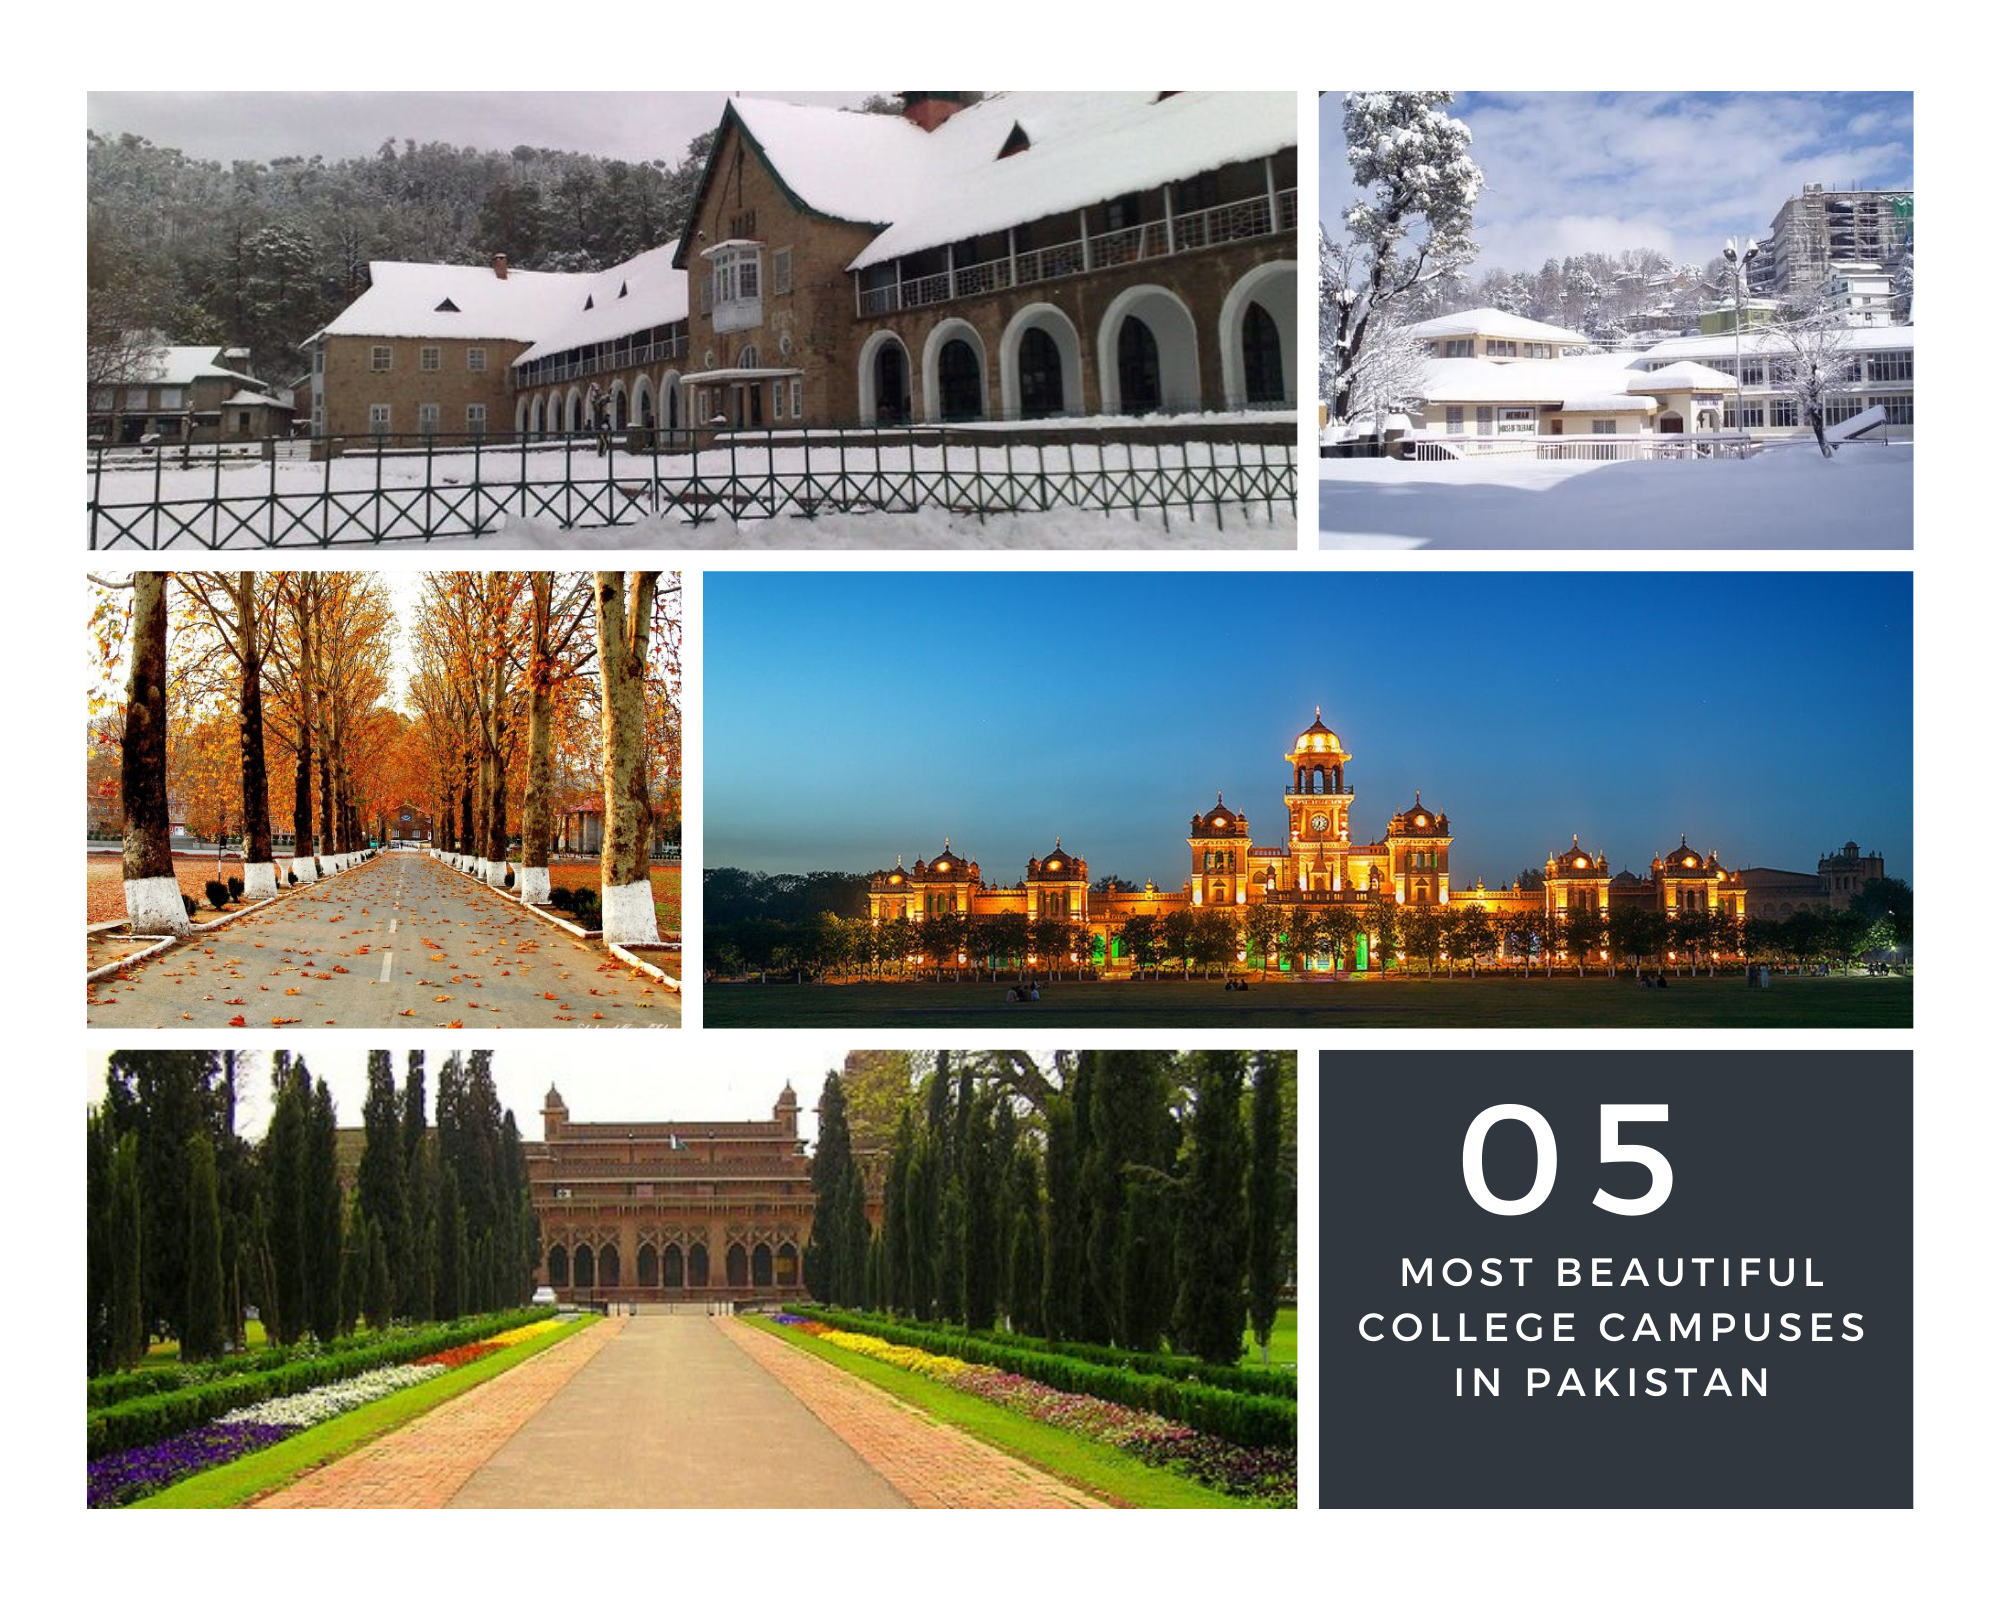 5 Most Beautiful College Campuses in Pakistan